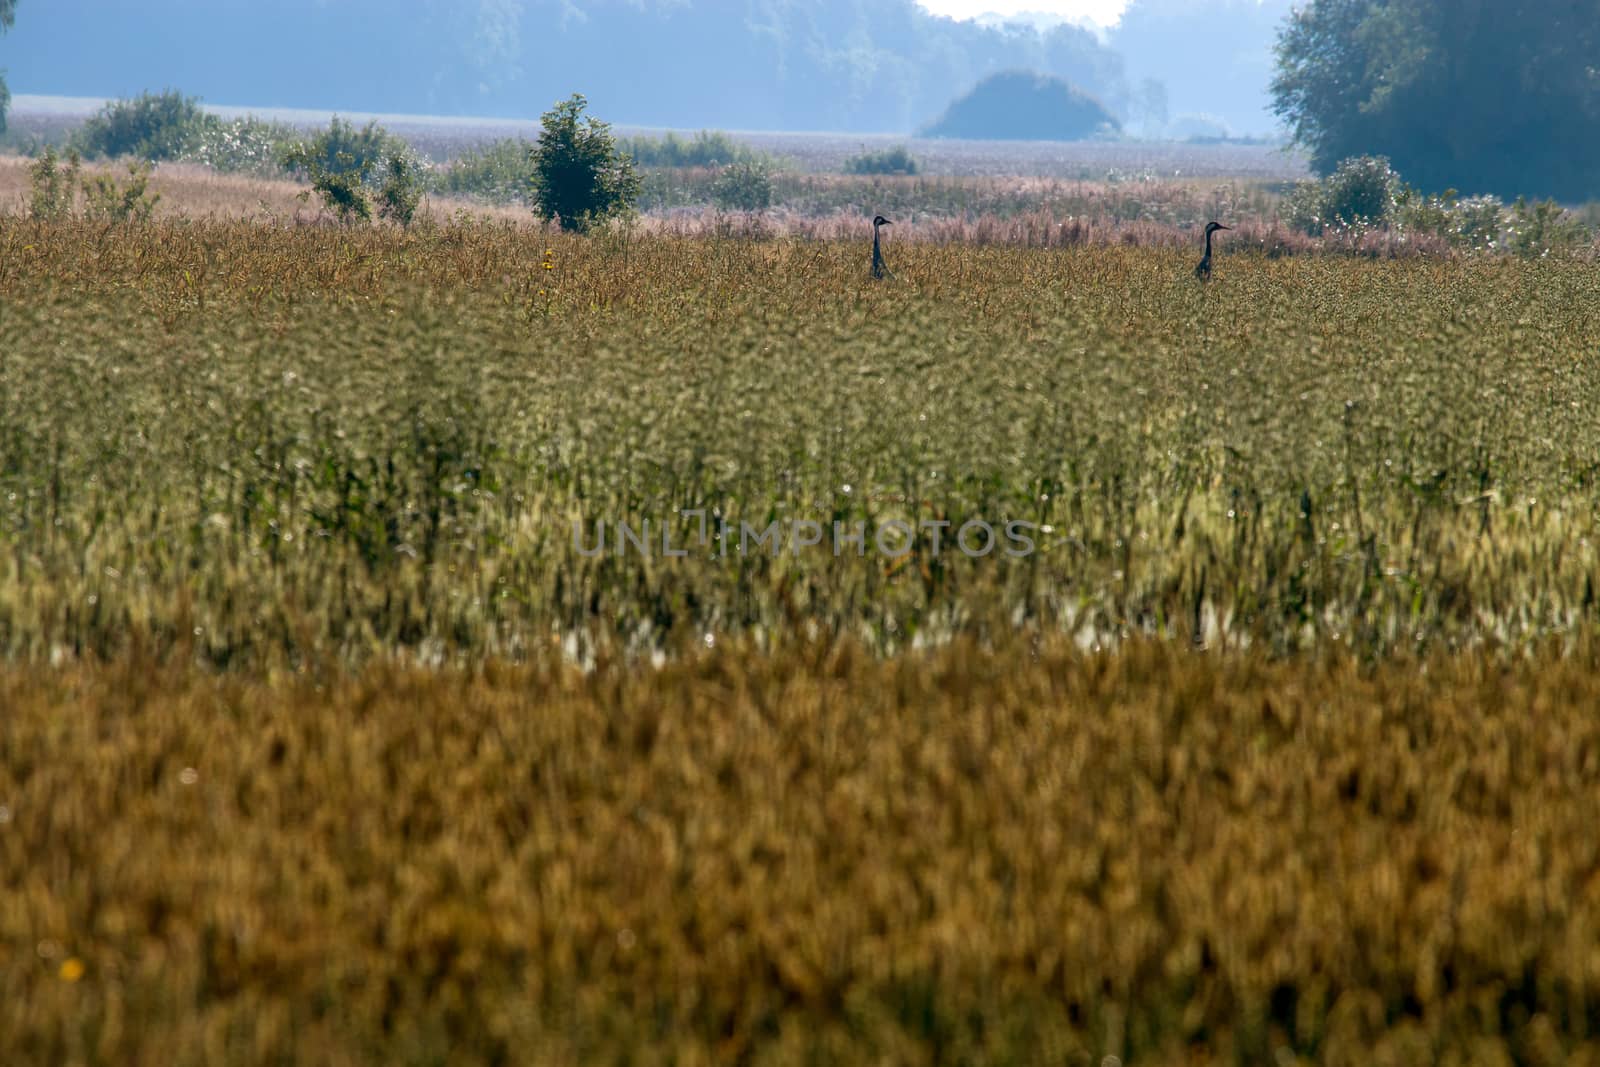 Two cranes in misty field. Summer landscape with field, and fog in the distance. Crane bird in cereal field. Classic rural landscape in Latvia.